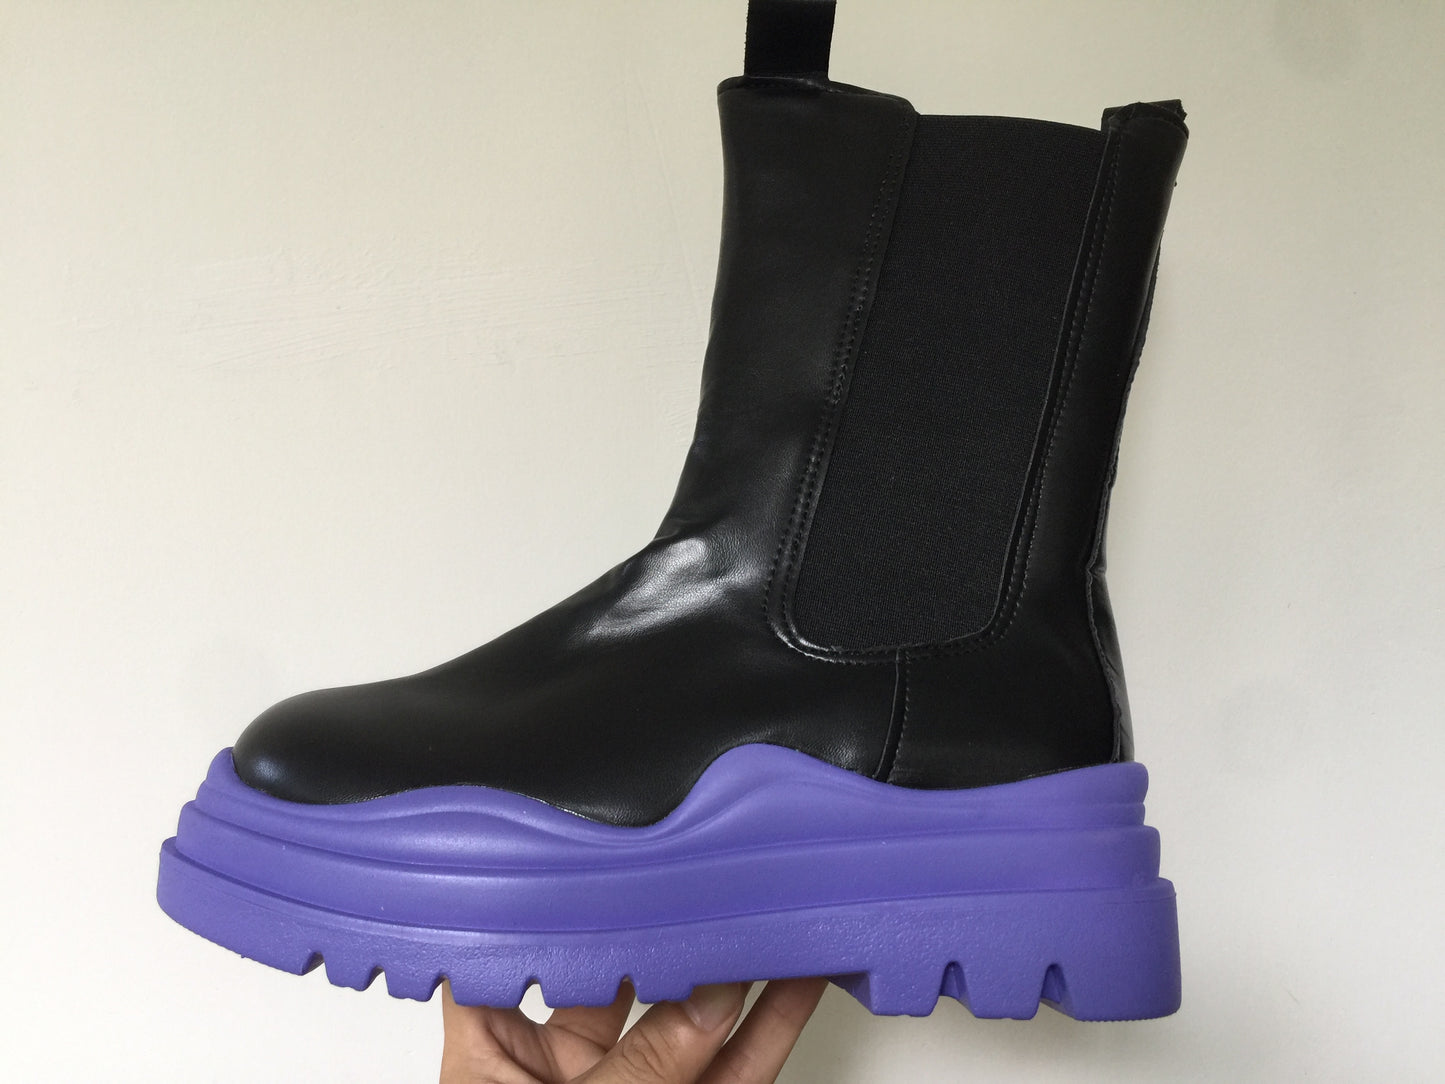 Too Fly Platform Boots